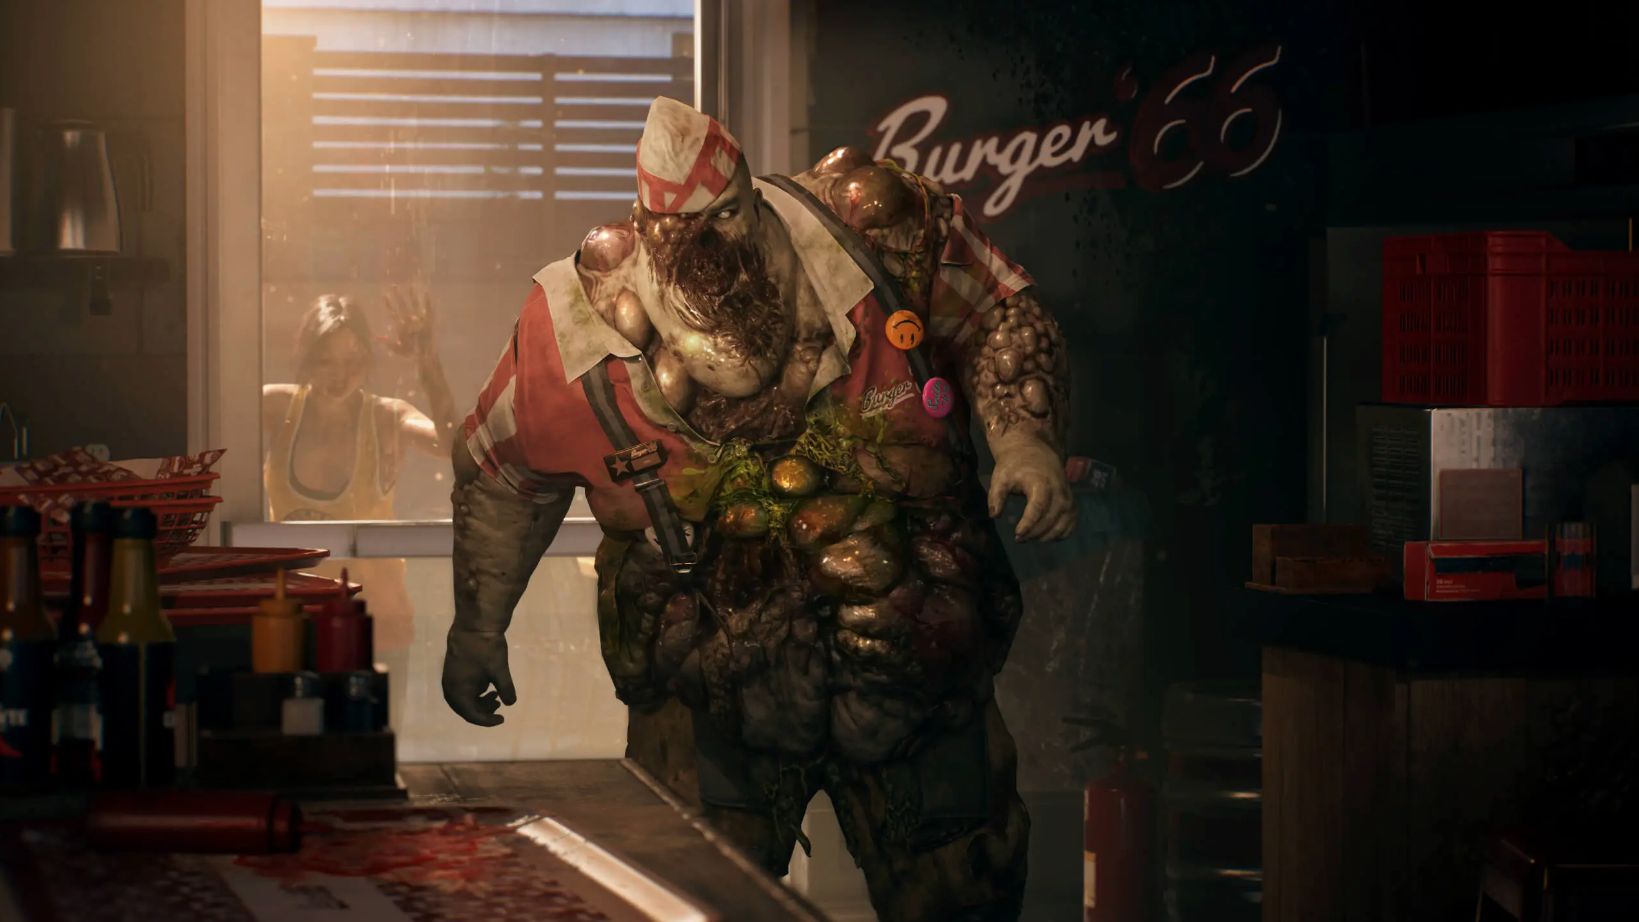 A bloated zombie from Dead Island 2, covered in what seem to be pustules, stands in the back of a burger restaurant, still wearing part of the uniform